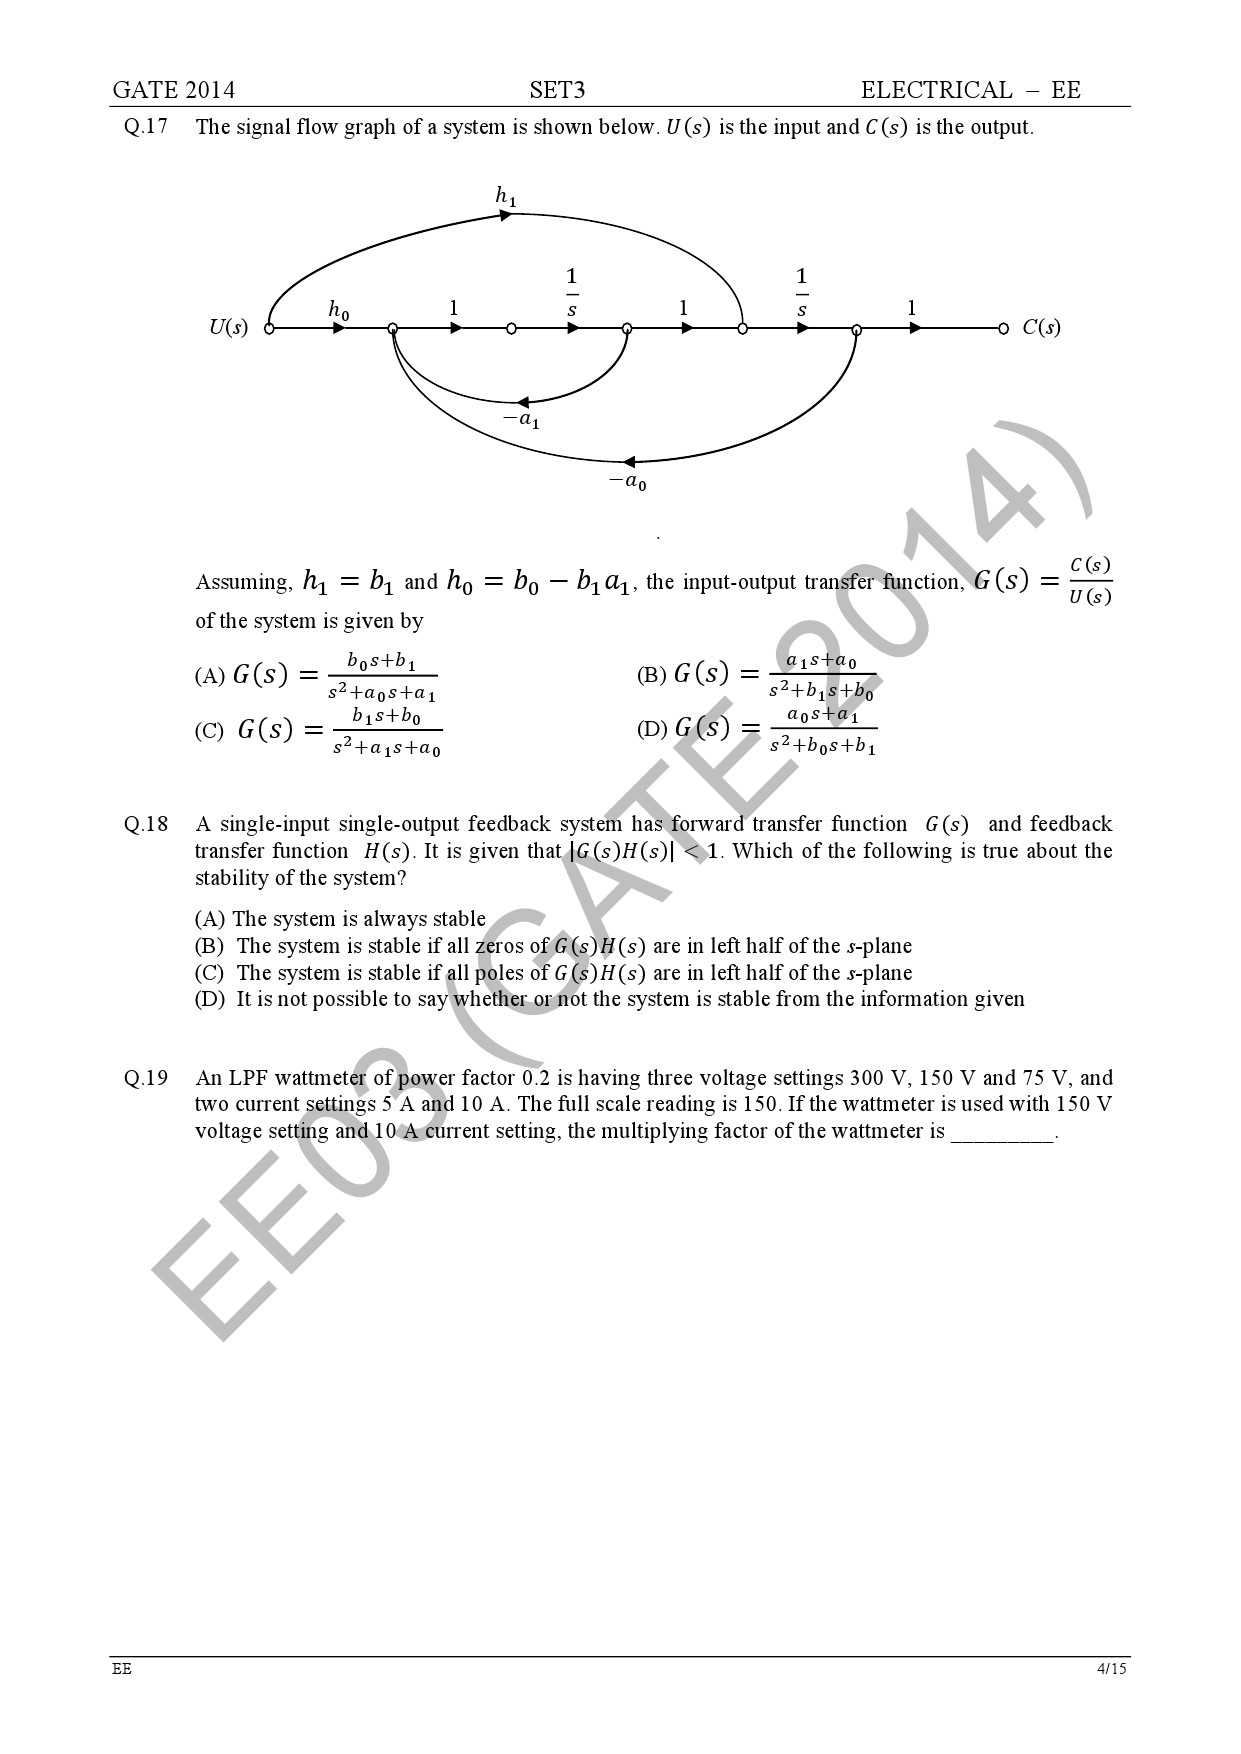 GATE Exam Question Paper 2014 Electrical Engineering Set 3 10